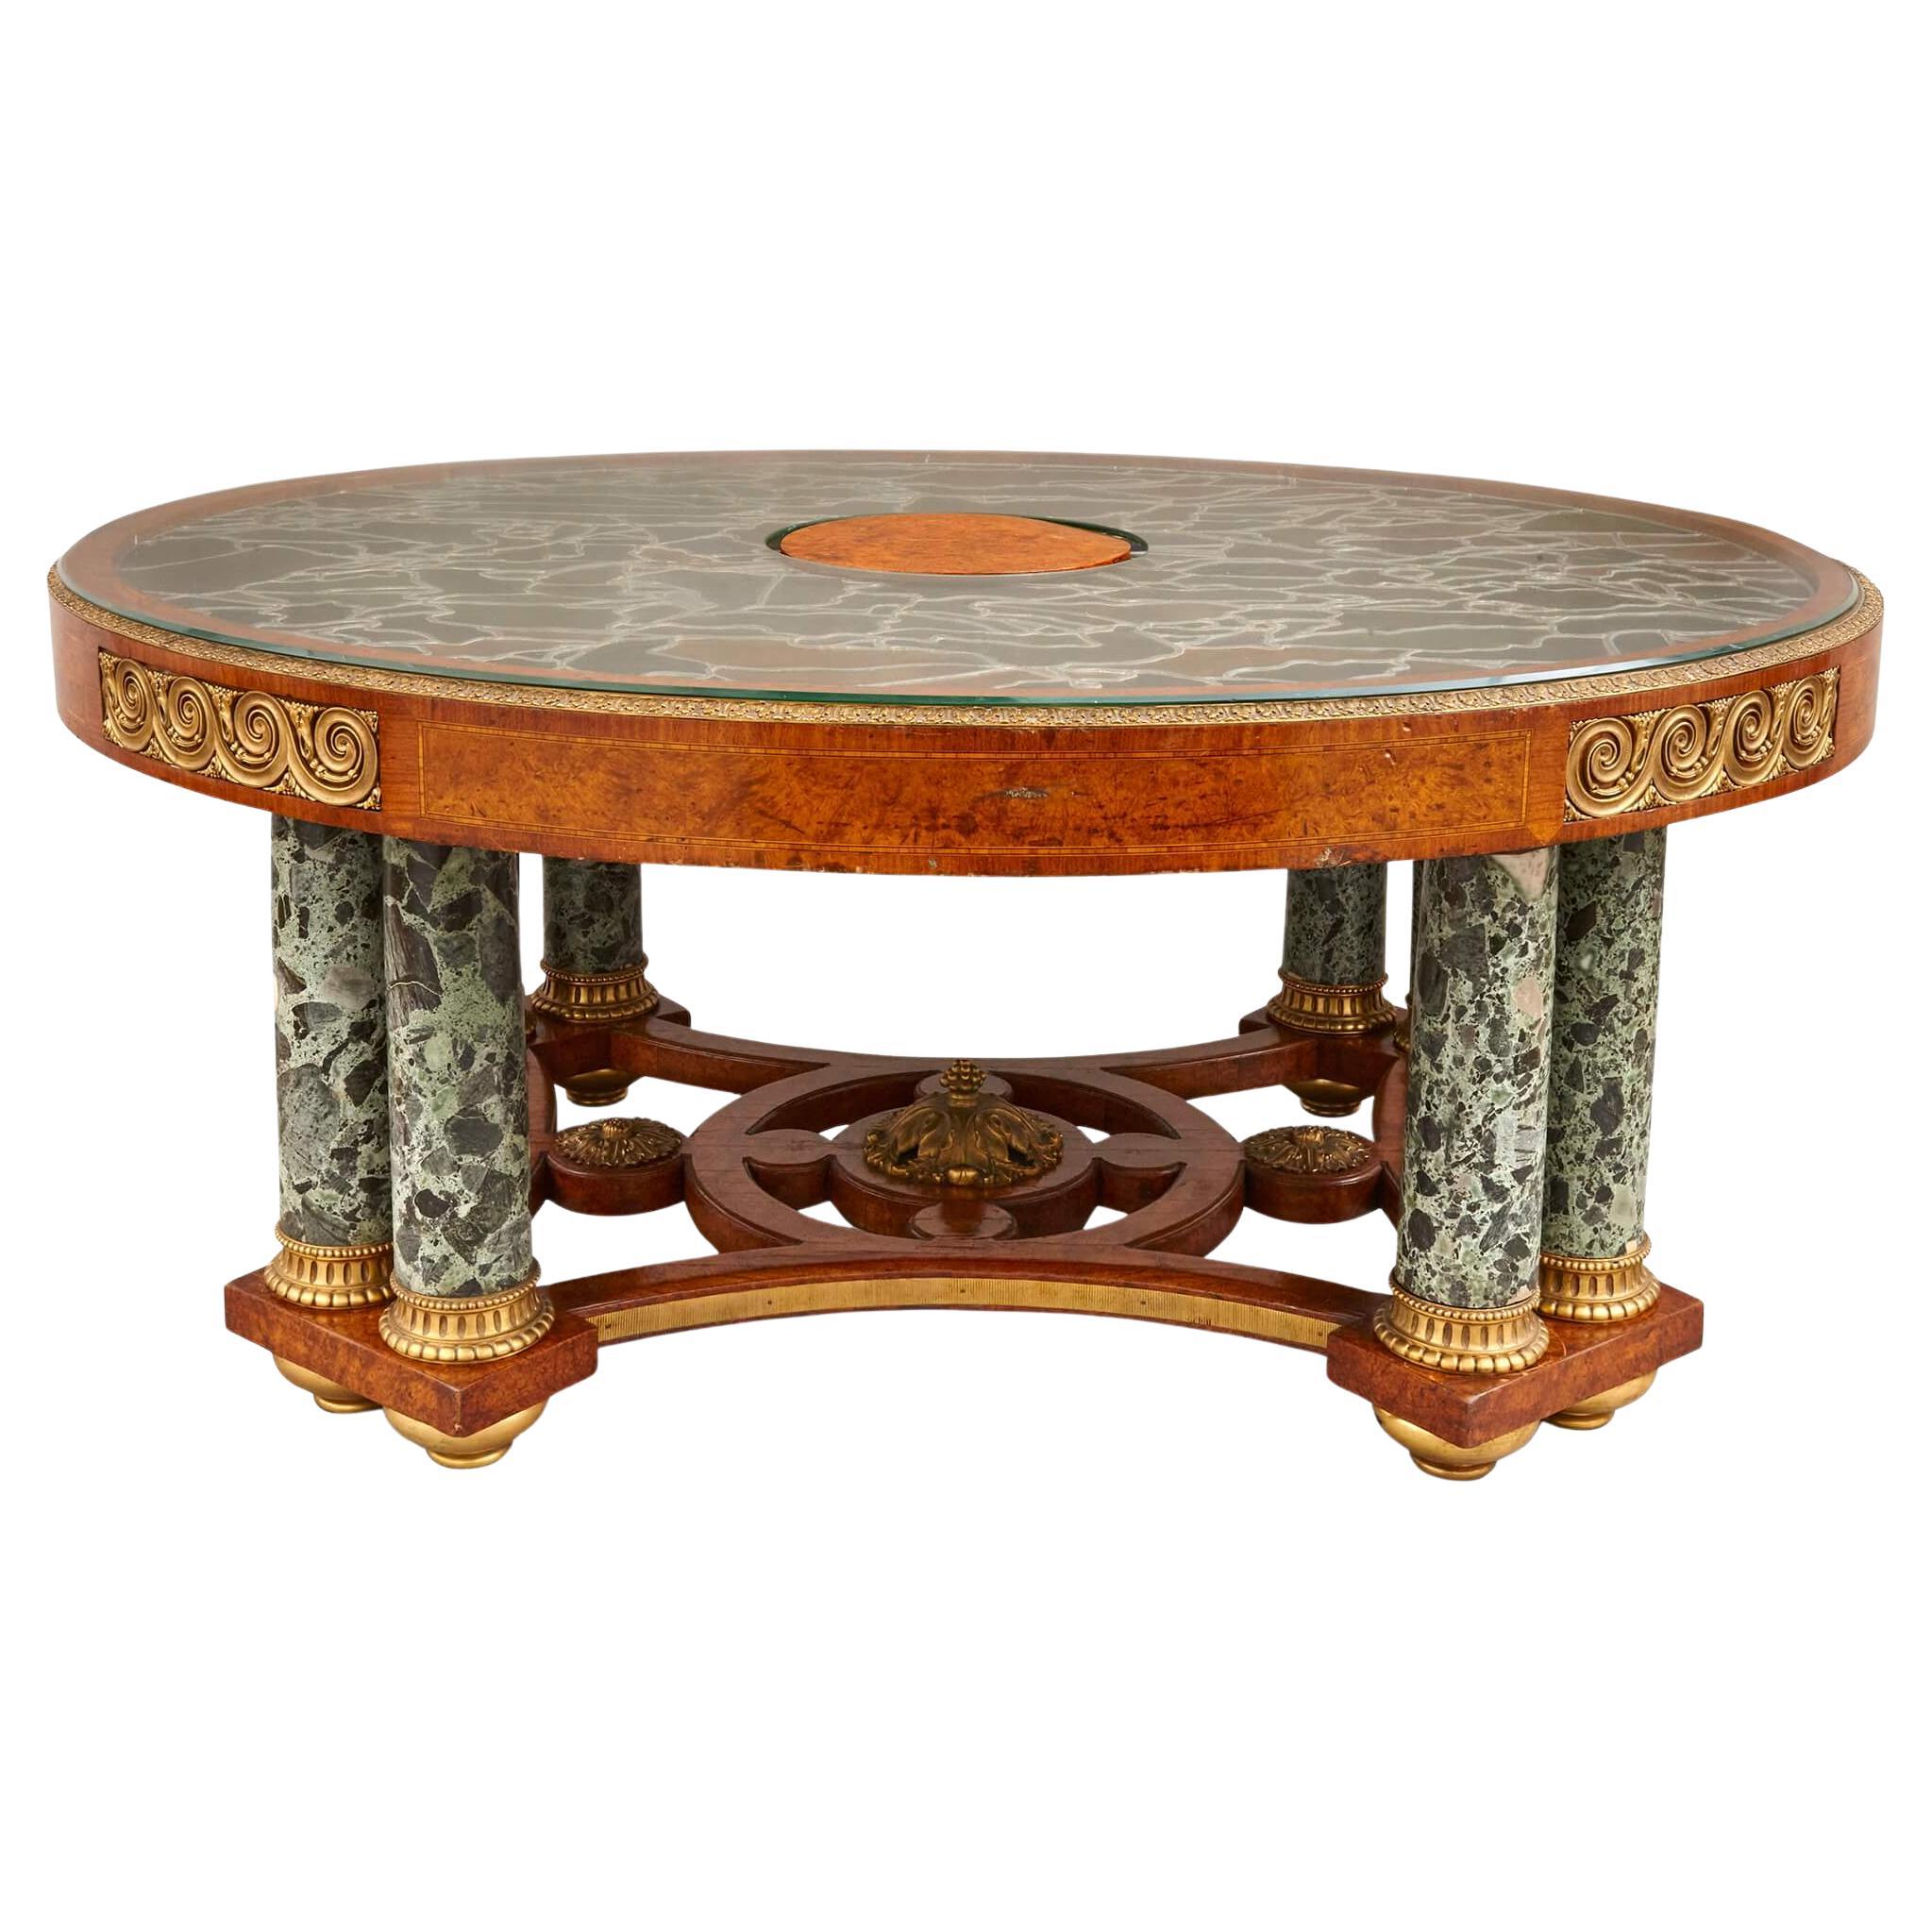 A large amboyna, stained glass, marble, and ormolu mounted centre table For Sale